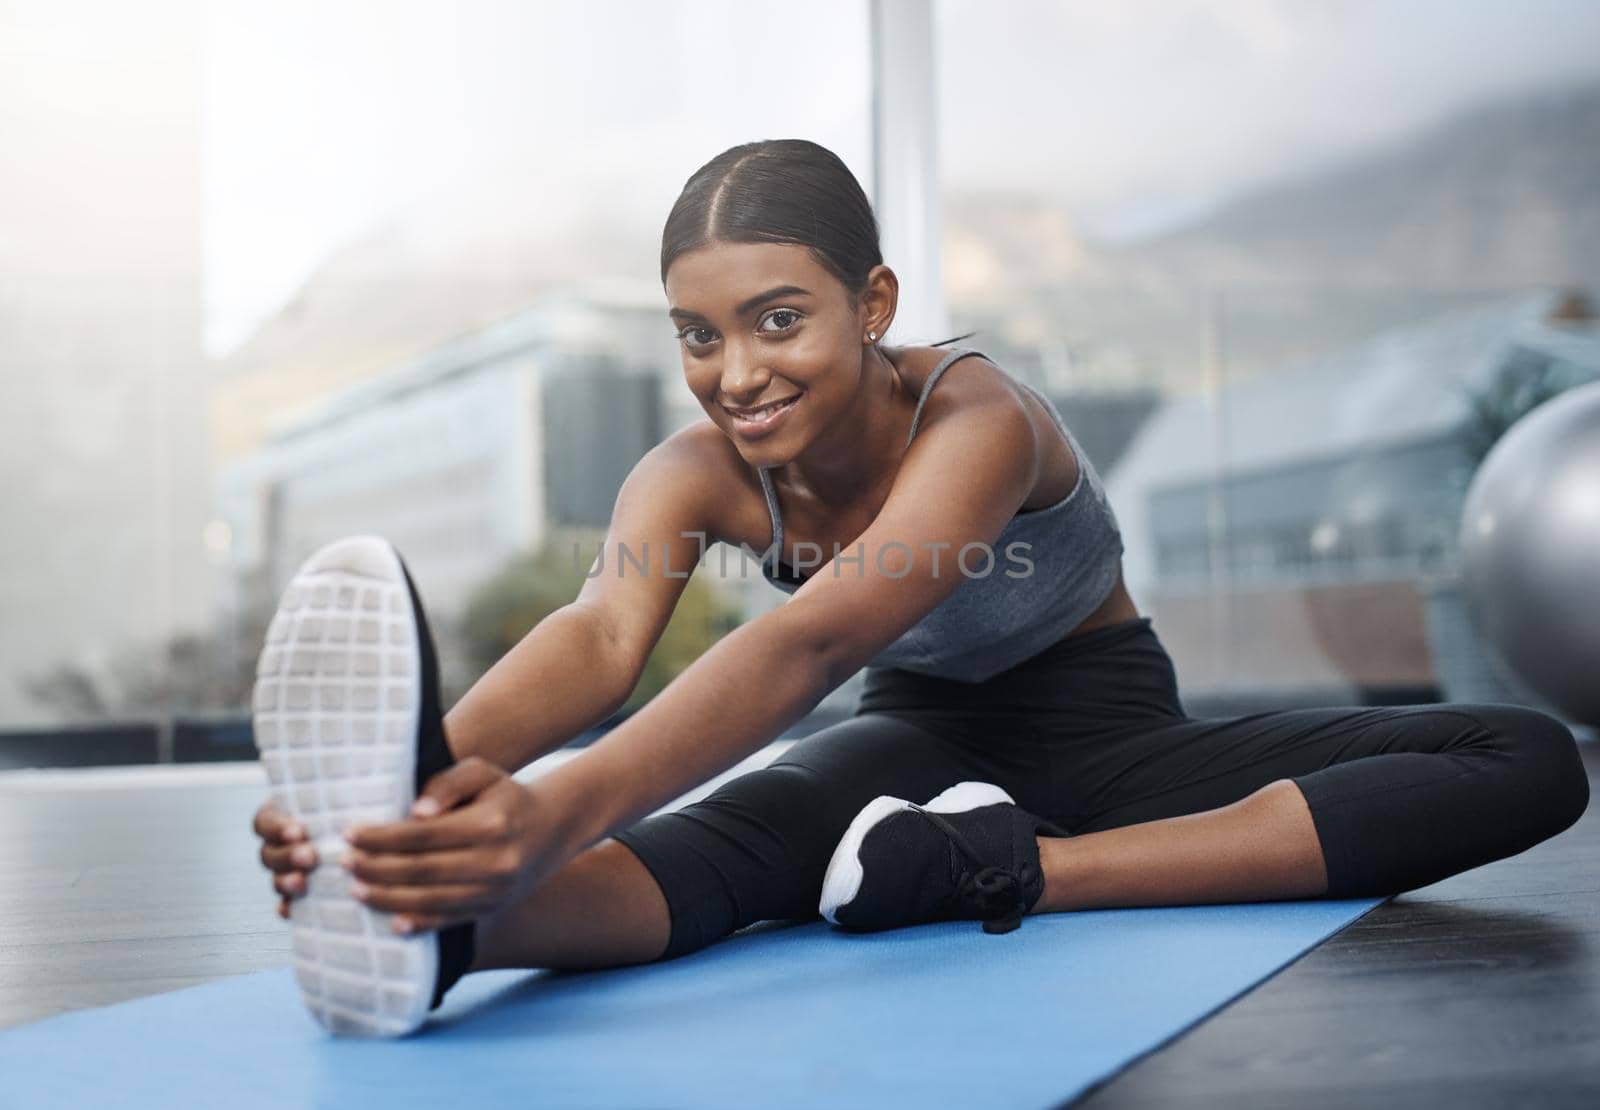 Sometimes all you need to do is smile through it. a beautiful young woman smiling while sitting down and doing stretching exercises on her gym mat at home